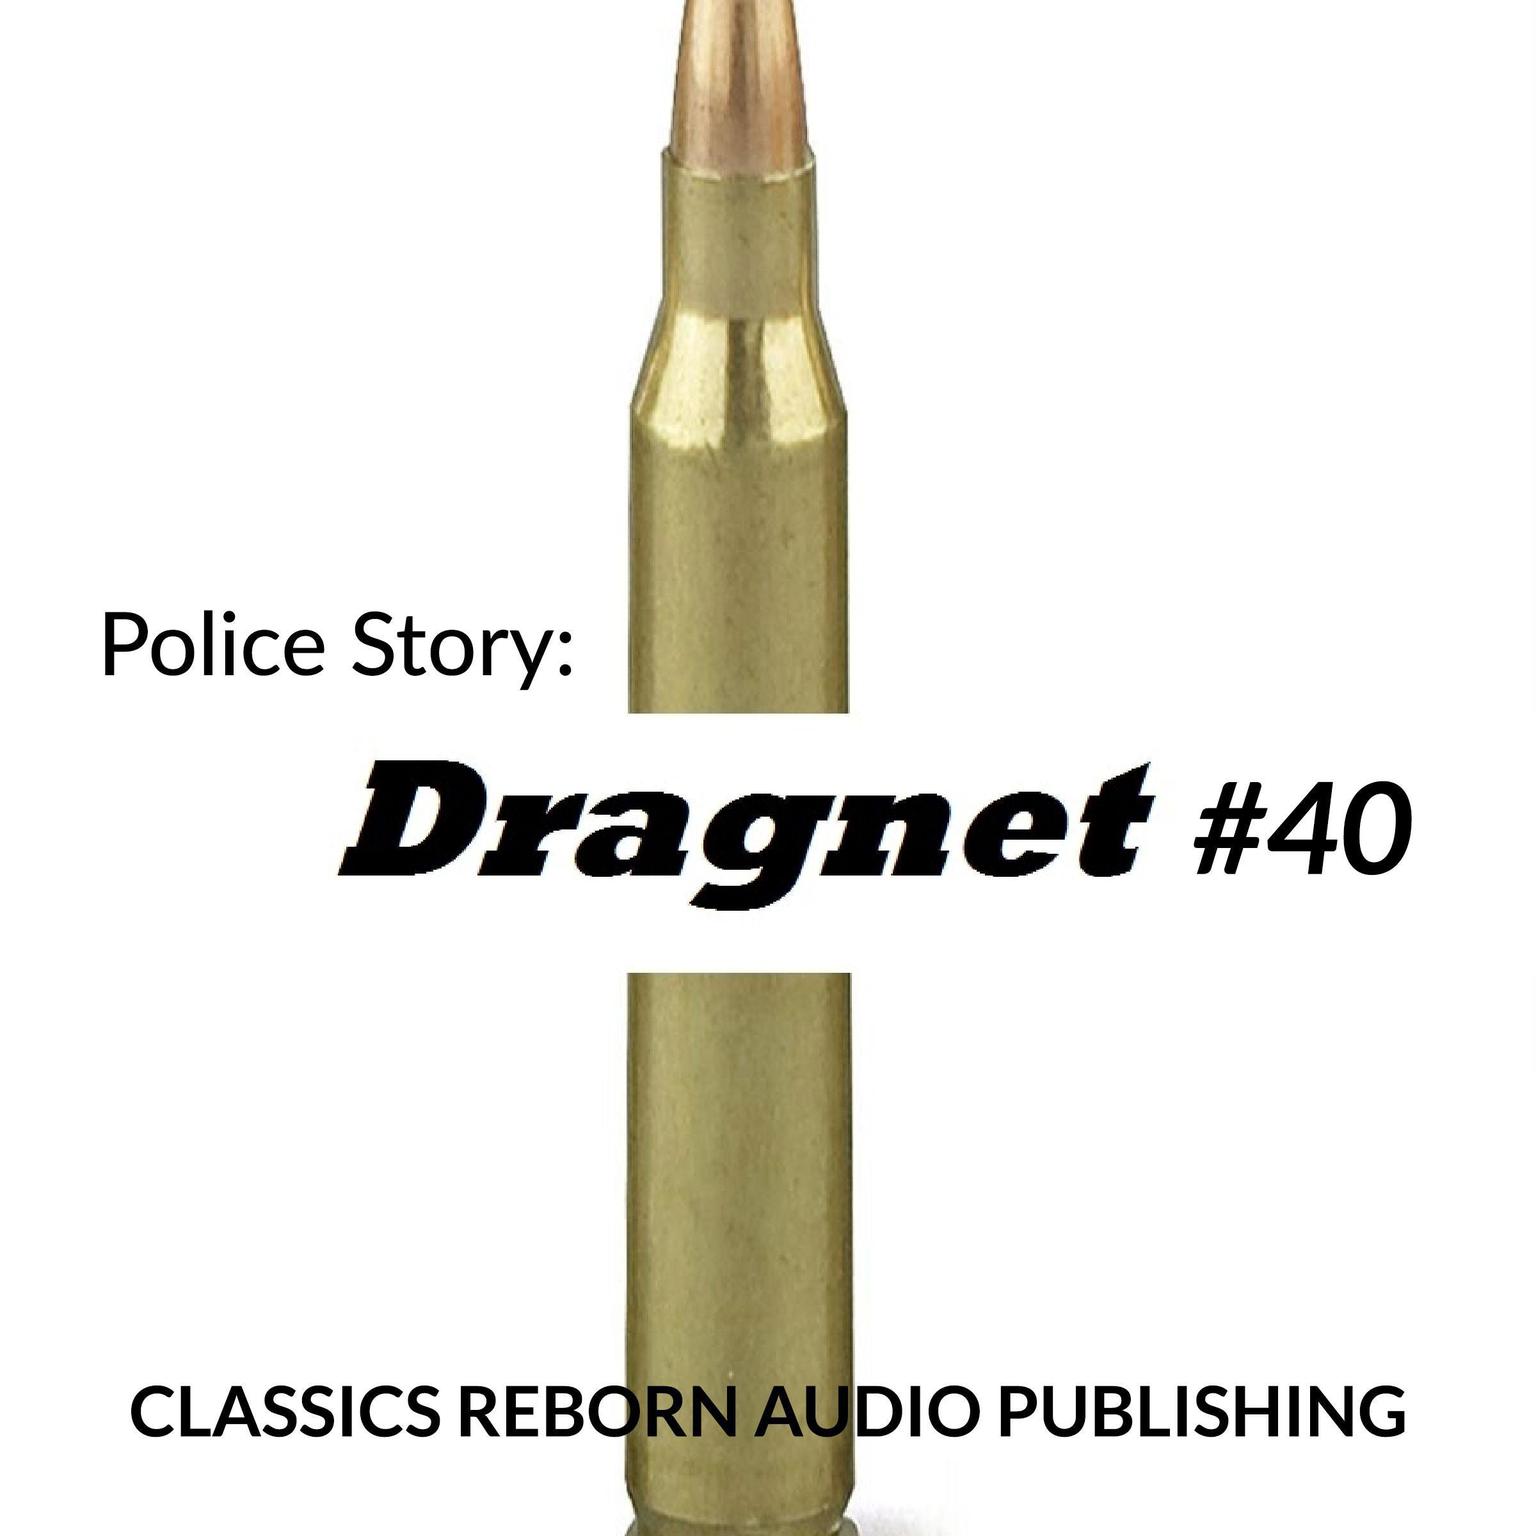 Police Story: Dragnet #40 Audiobook, by Classics Reborn Audio Publishing